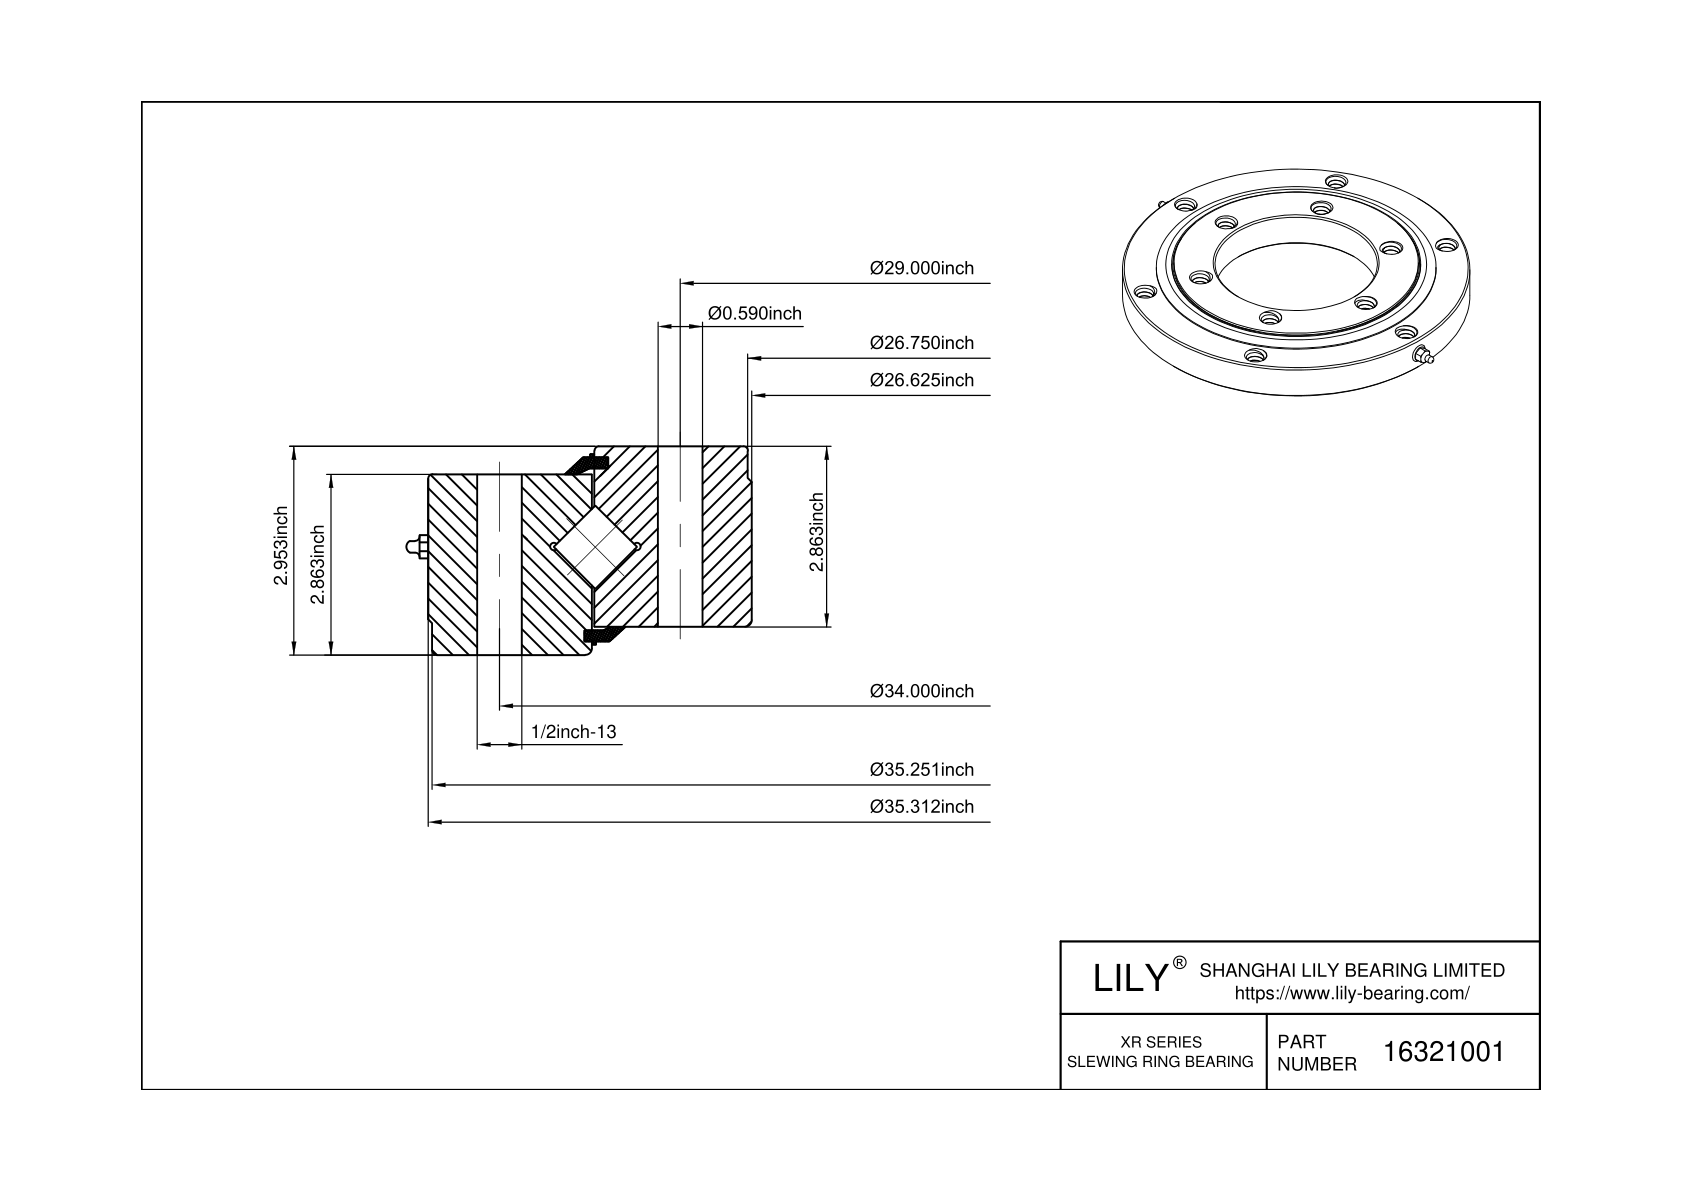 16321001 Cross Roller Slewing Ring Bearing cad drawing